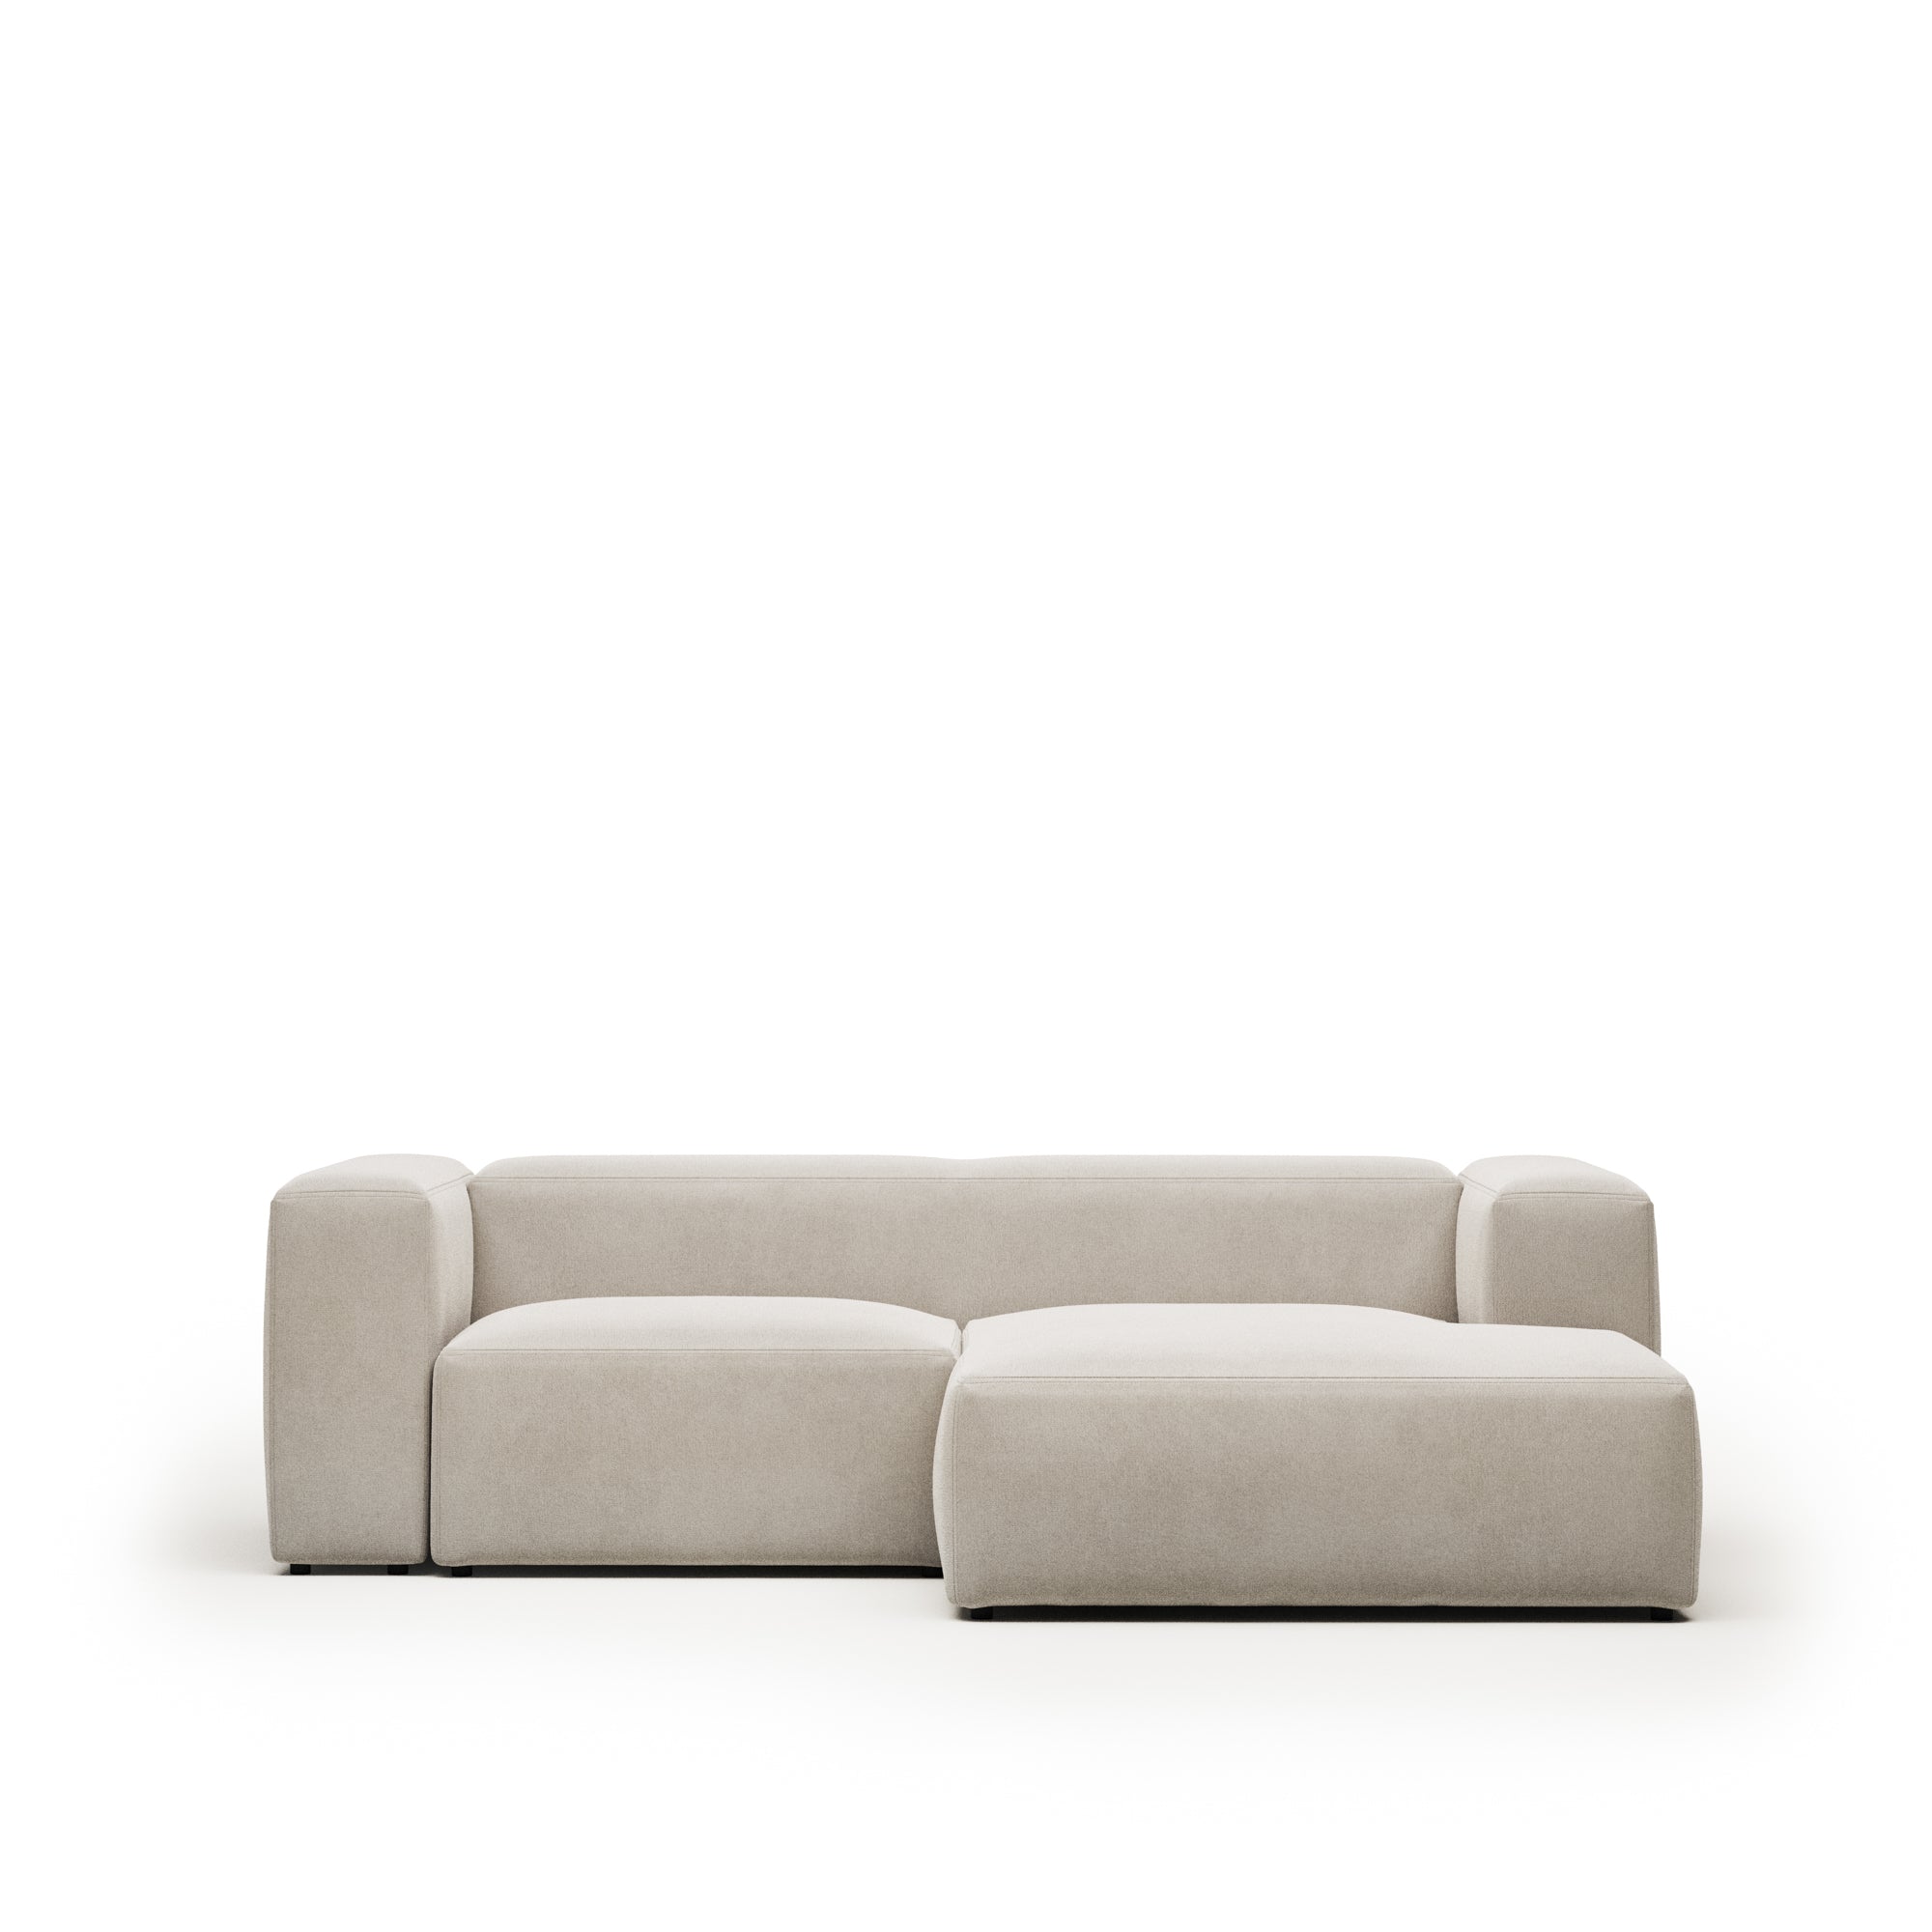 Bloka 2 seater sofa with right-hand chaise longue in beige, 240 cm